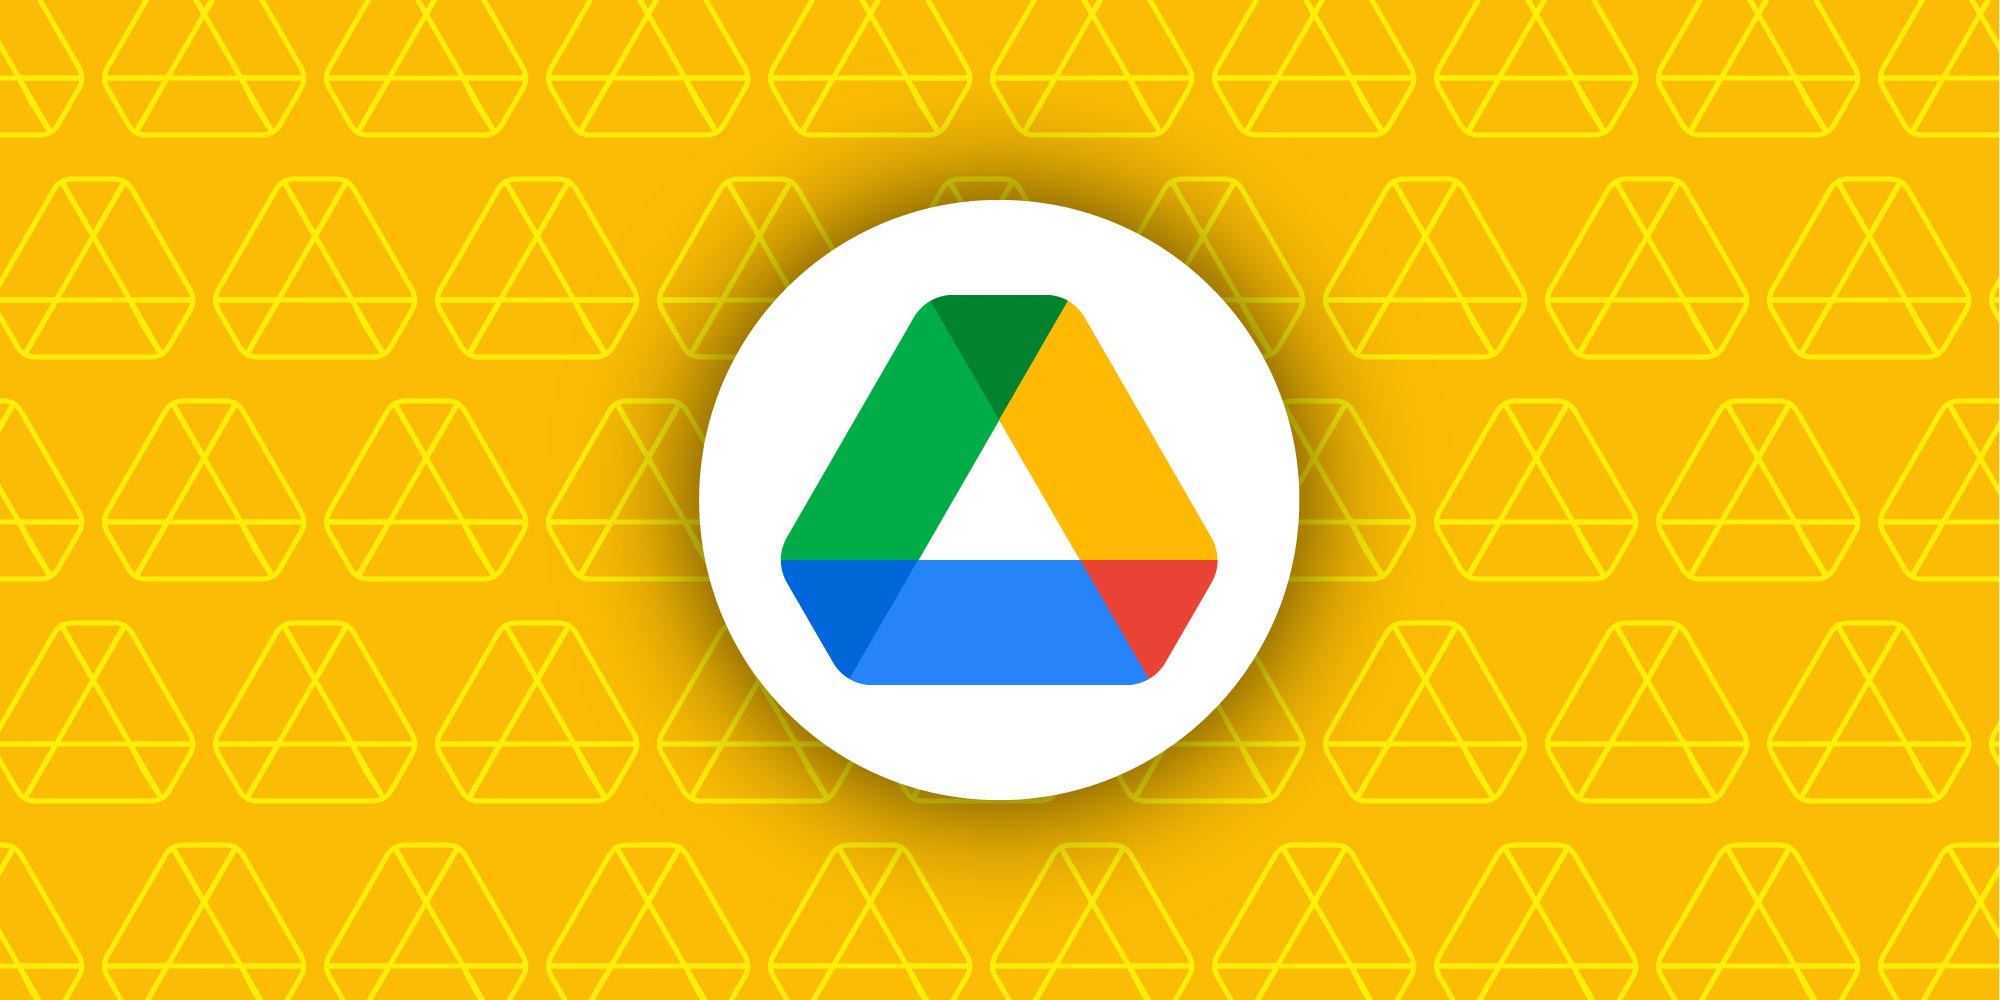 AnyDrive Online Guide – Add Google Drive